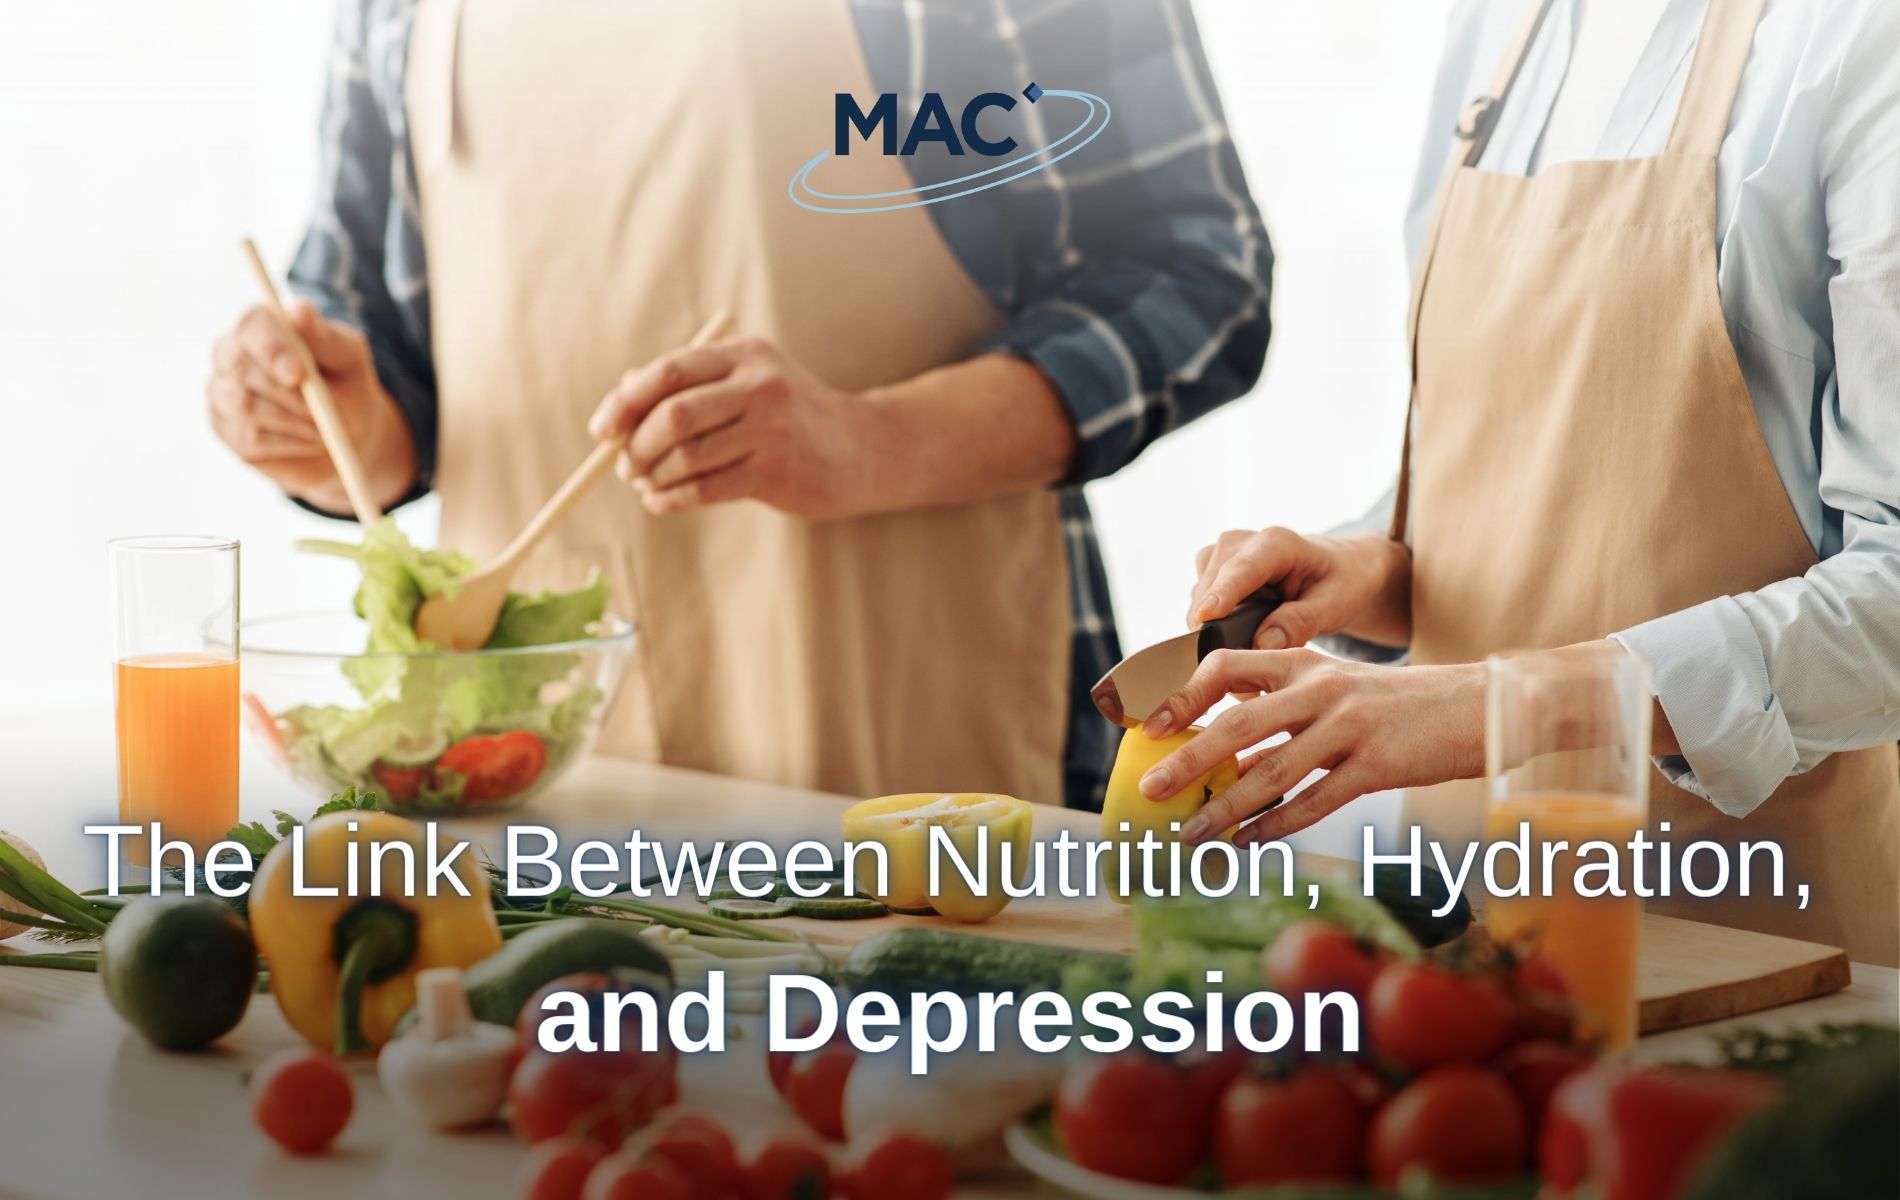 The Link Between Nutrition, Hydration, and Depression